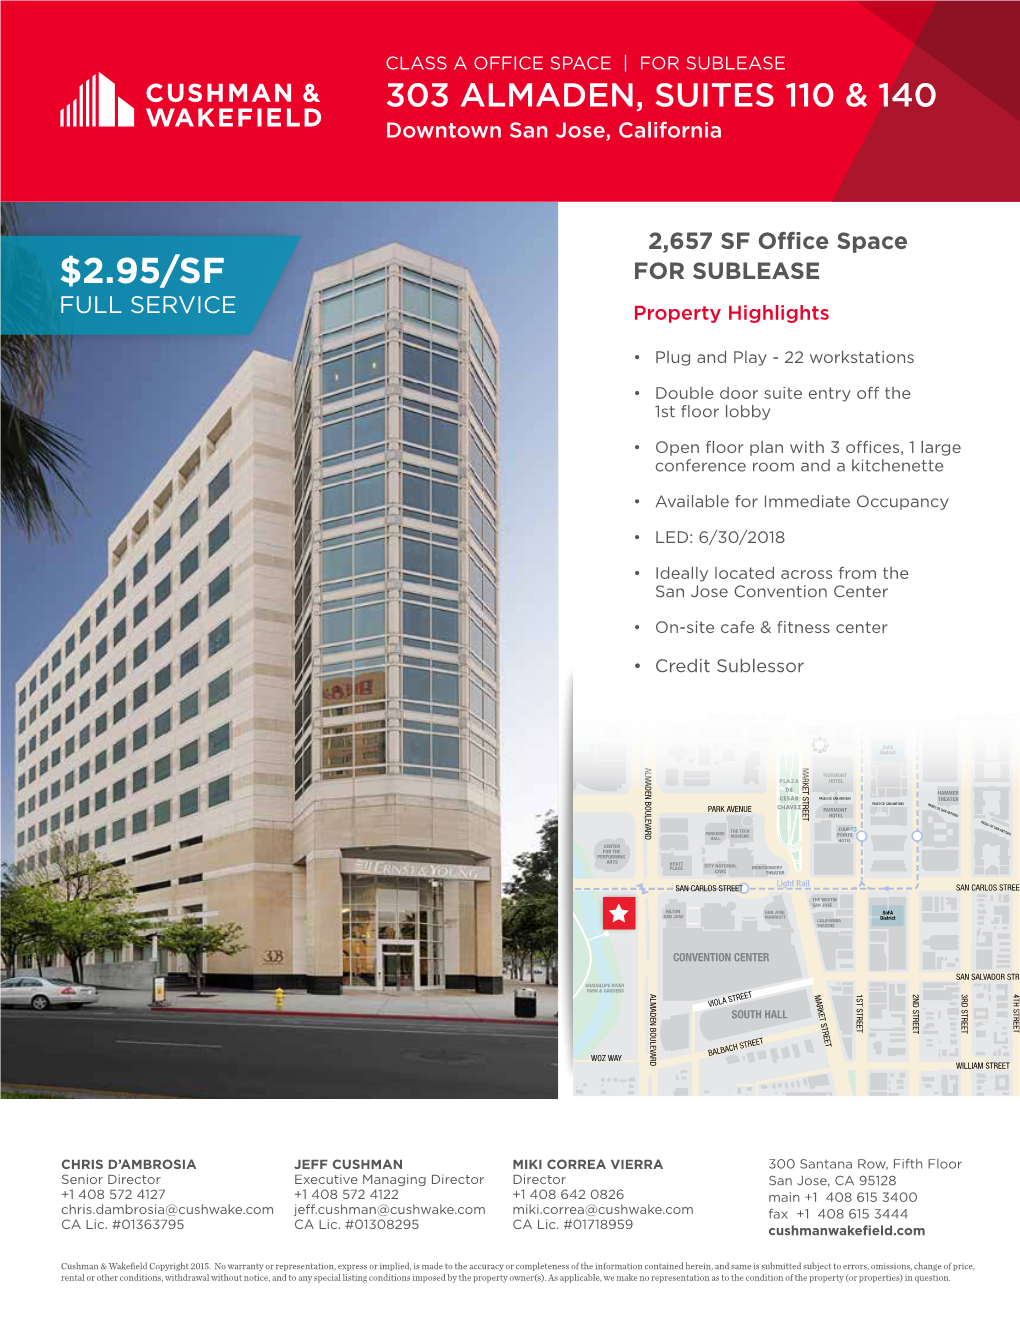 $2.95/SF for SUBLEASE FULL SERVICE Property Highlights